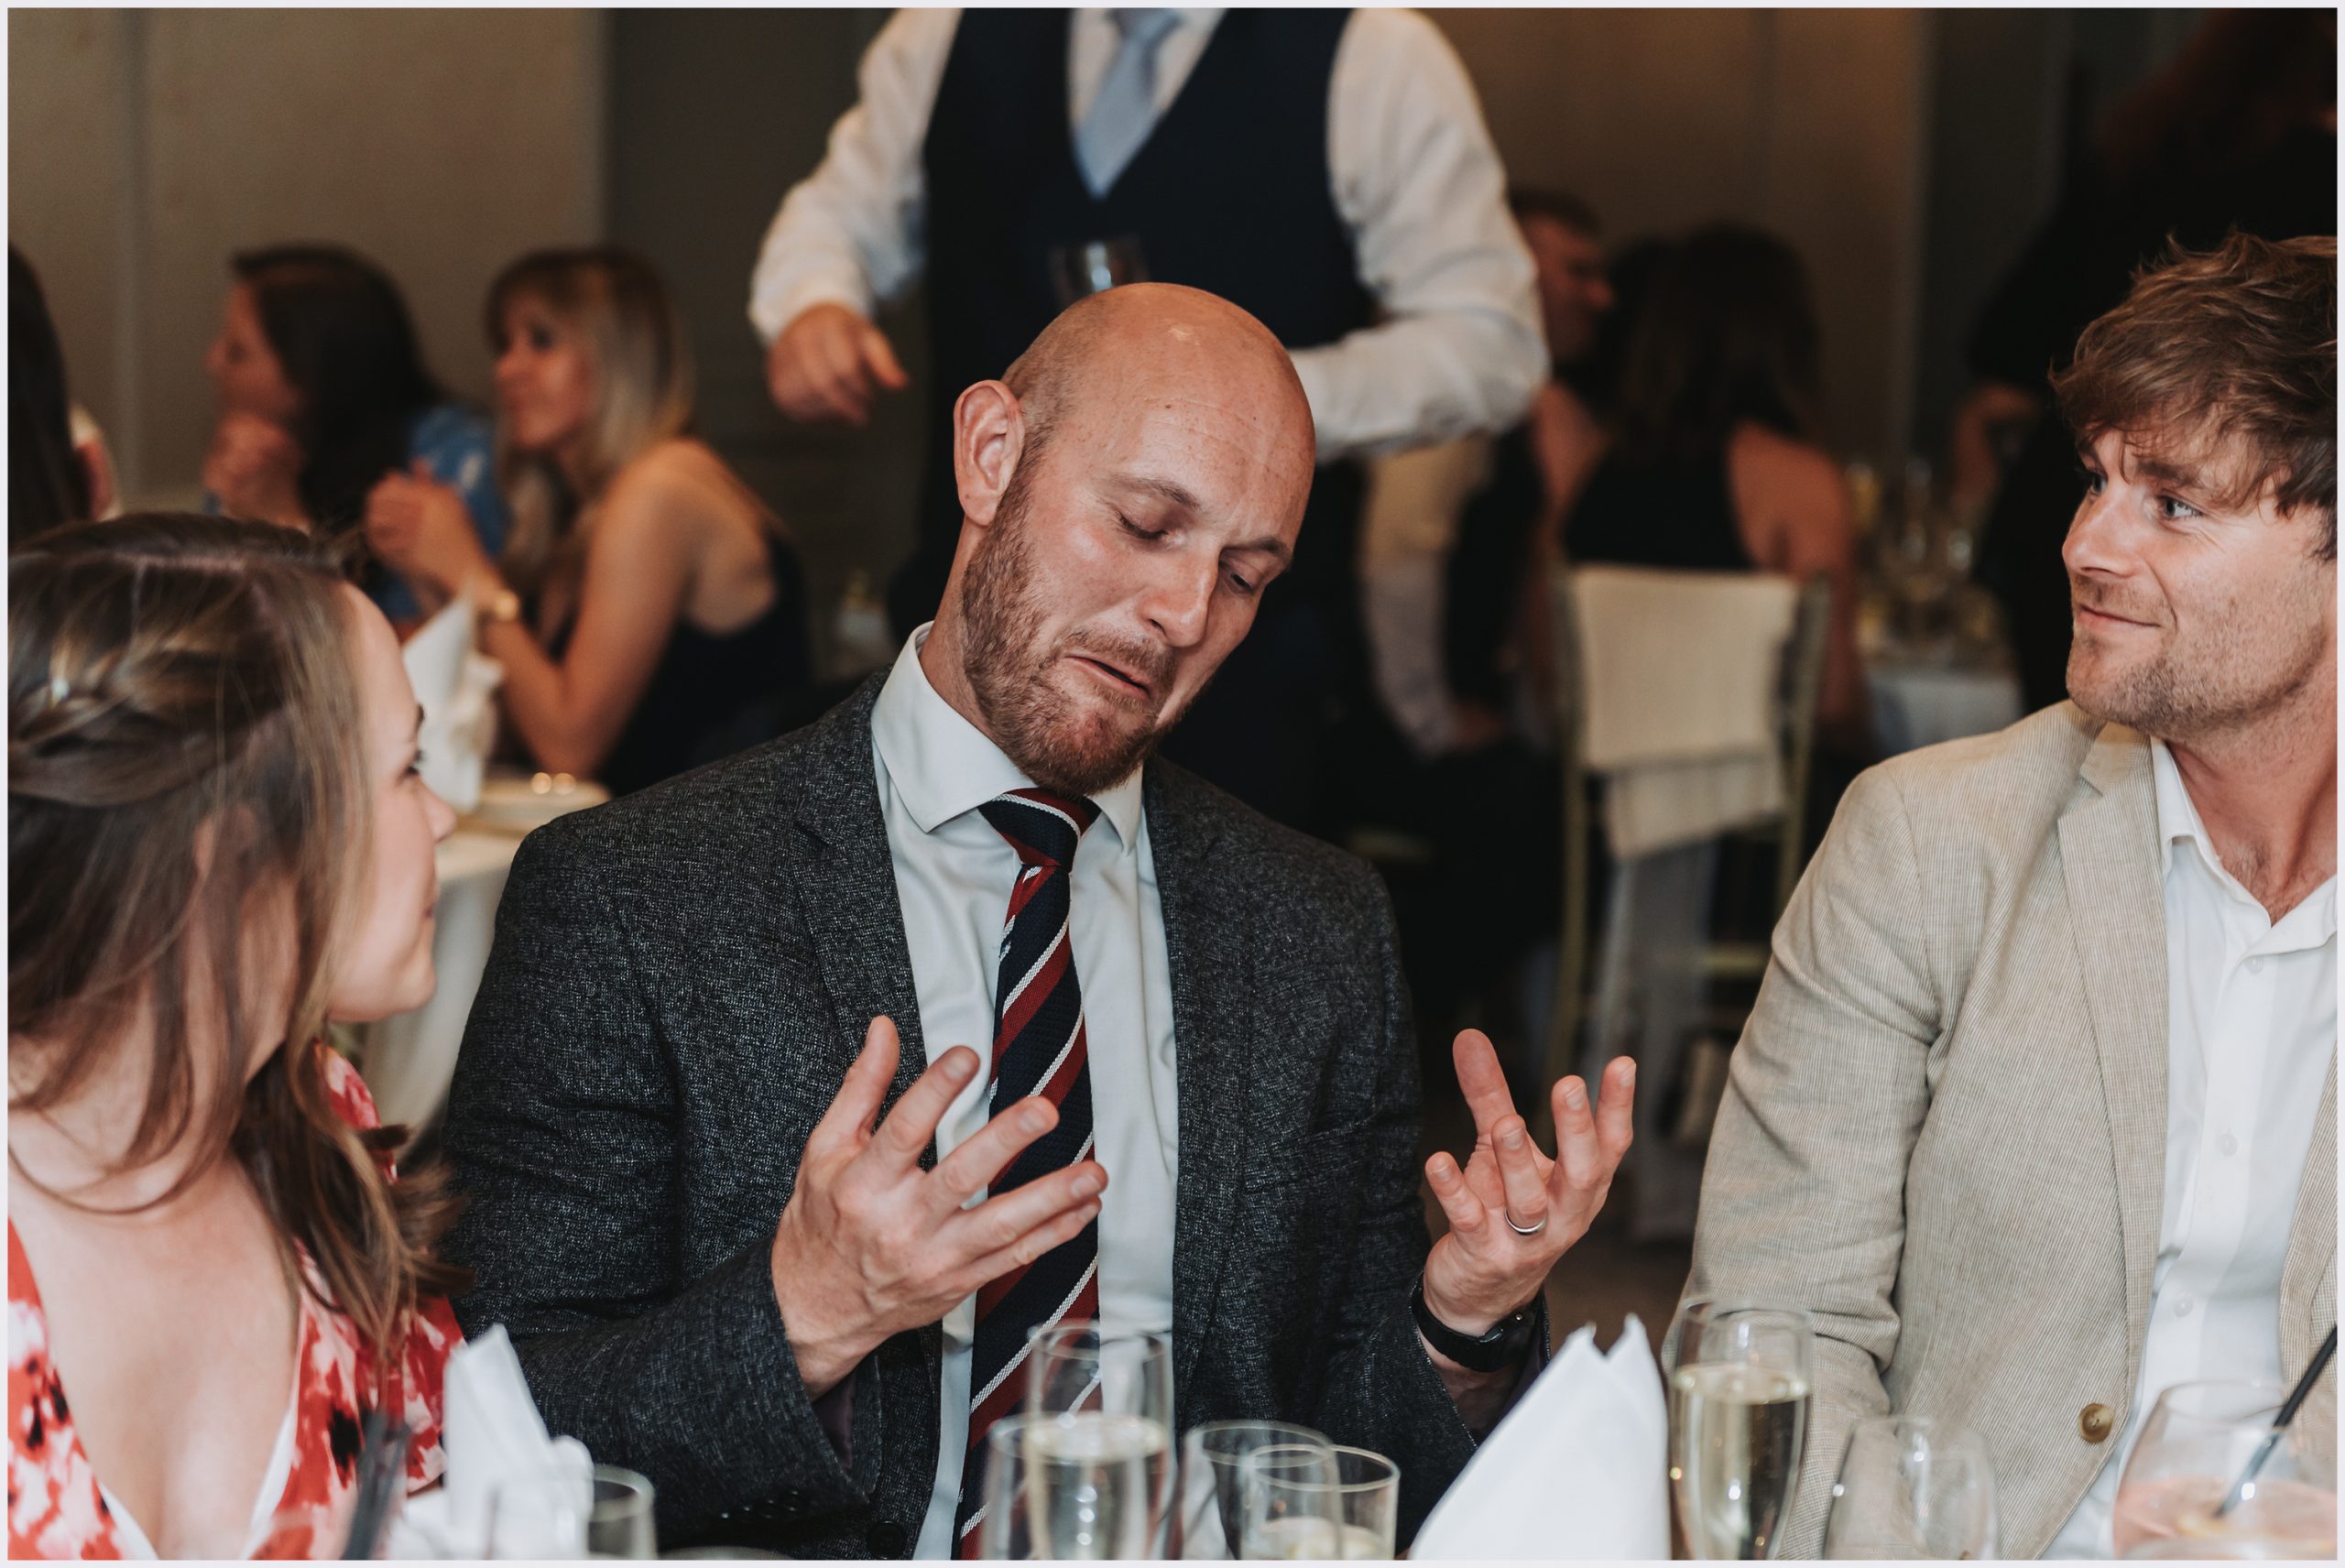 Guests joke and laugh before the speeches and wedding breakfast at the Grosvenor Pulford Hotel and Spa.  Image captured by Helena Jayne Photography